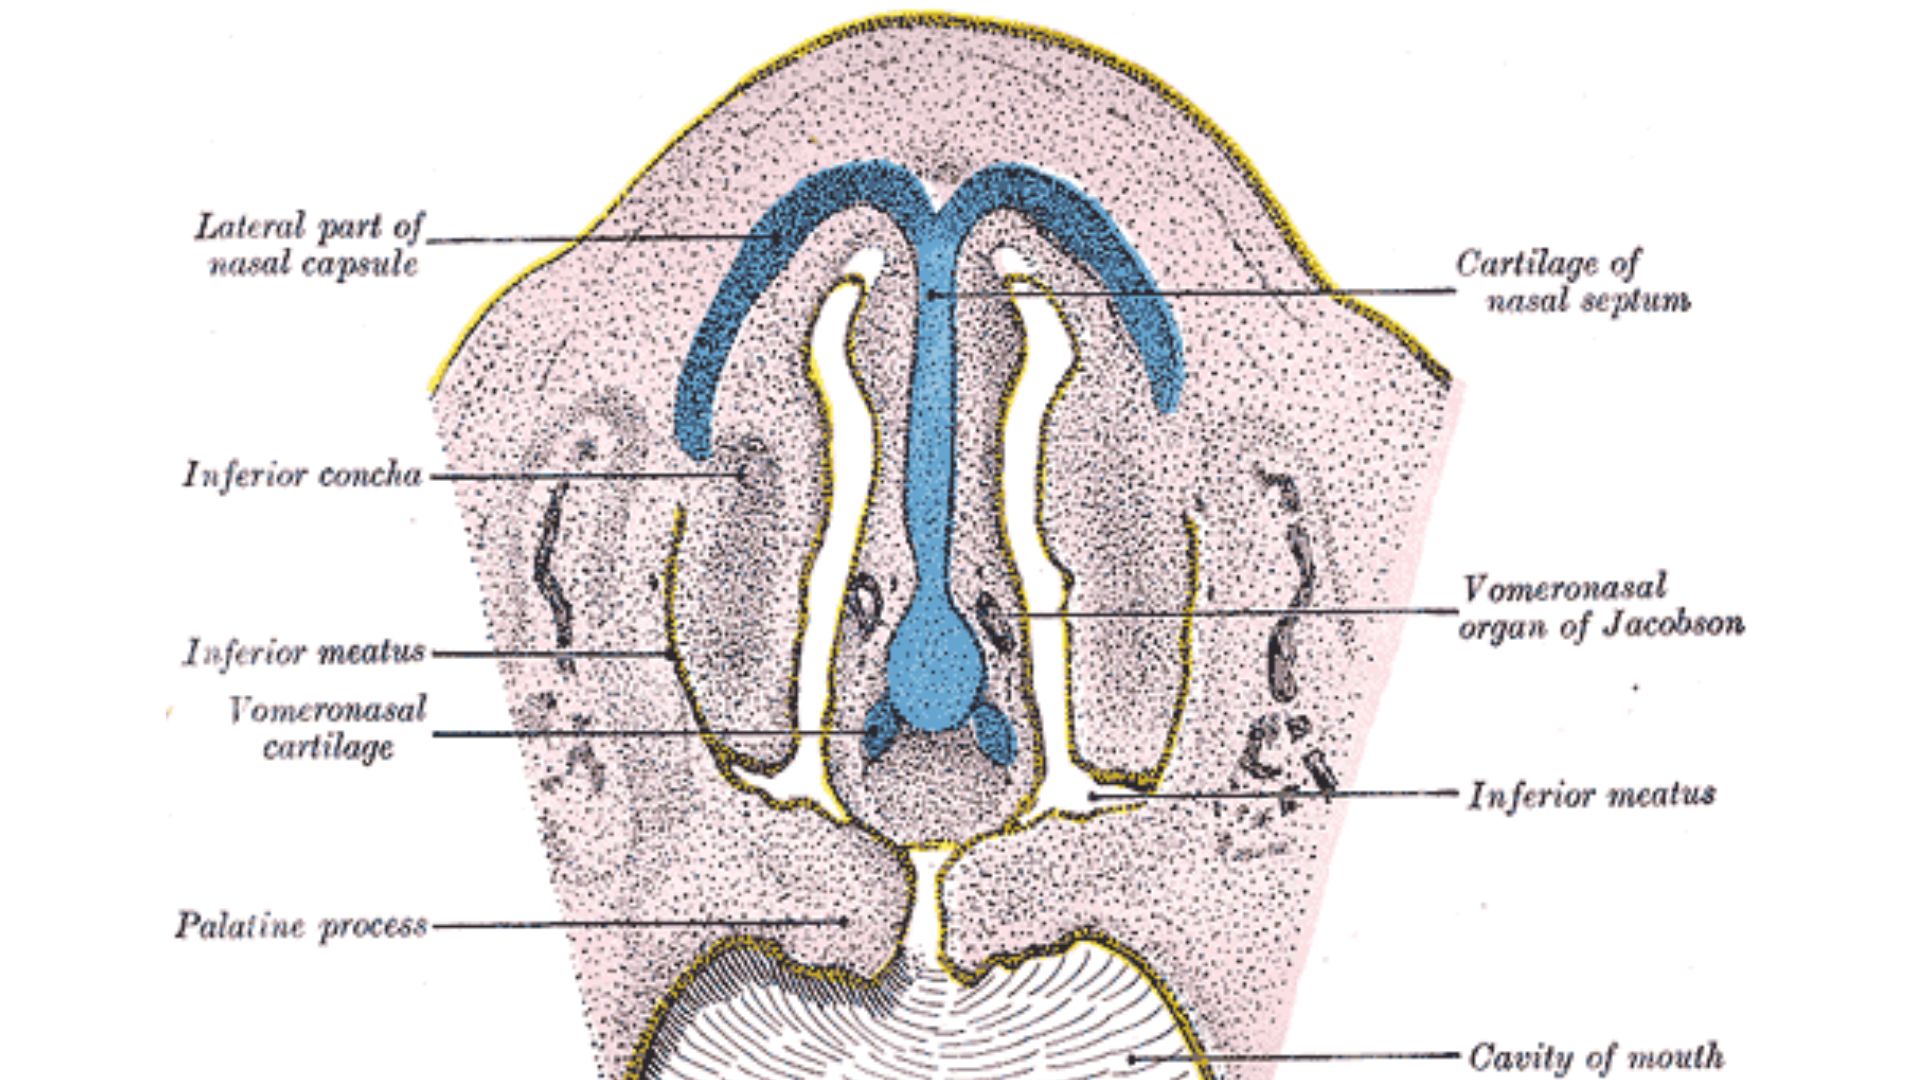 Illustration of the nasal cavity of a human embryo with the two openings of the vomeronasal organ labeled